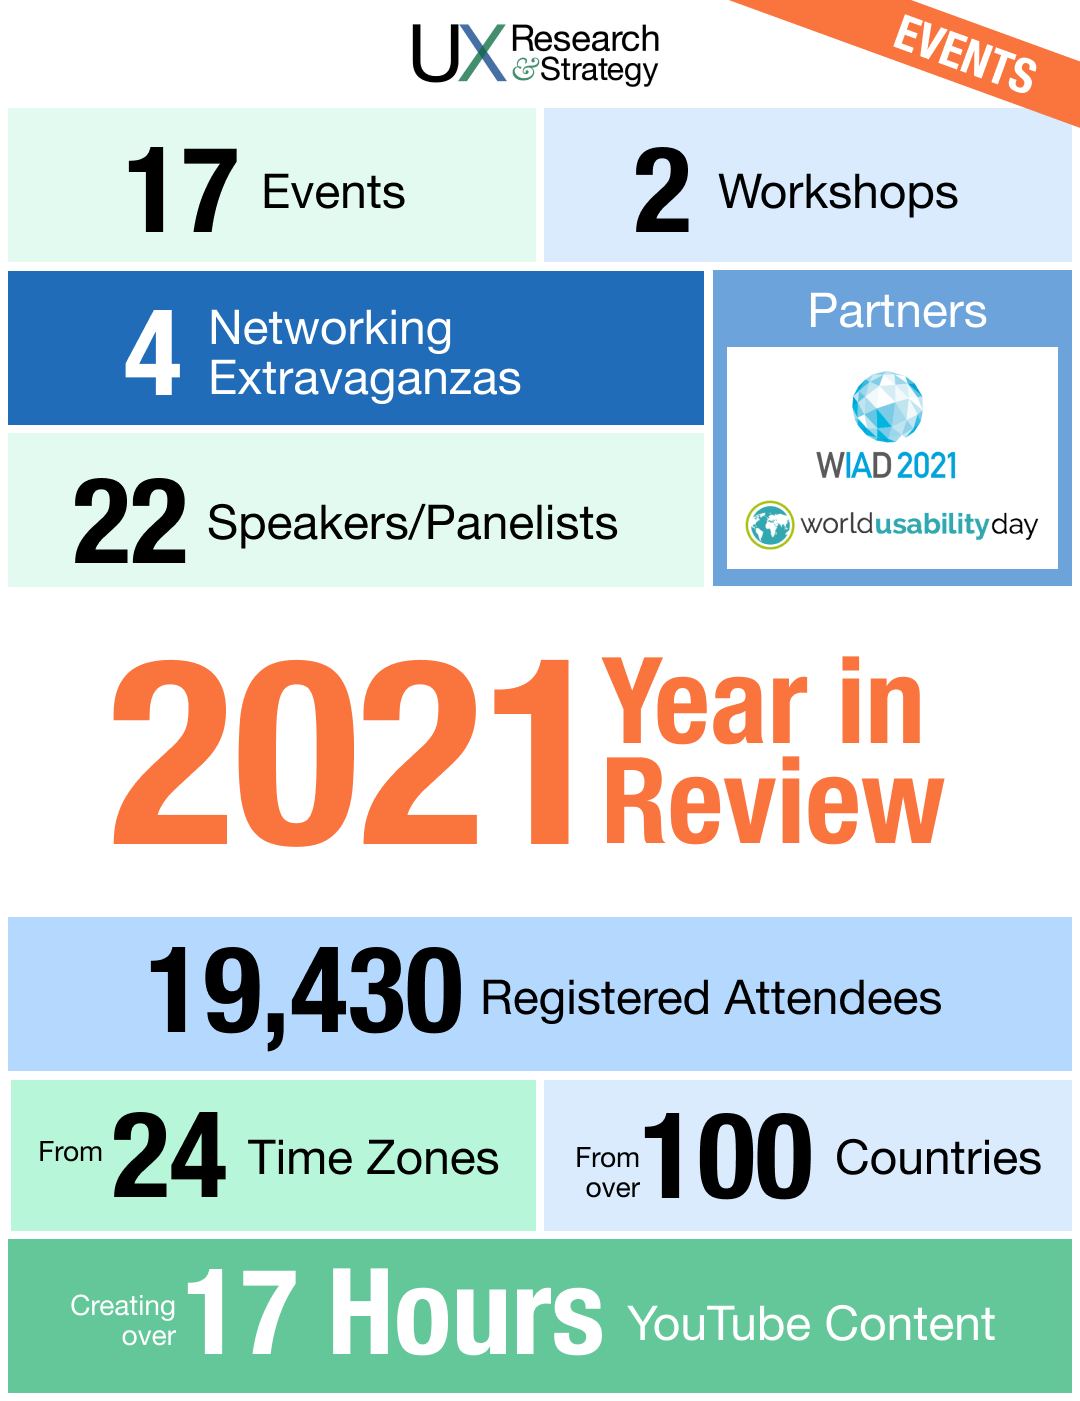 Graphic showing statistics about UXRS events in 2021.